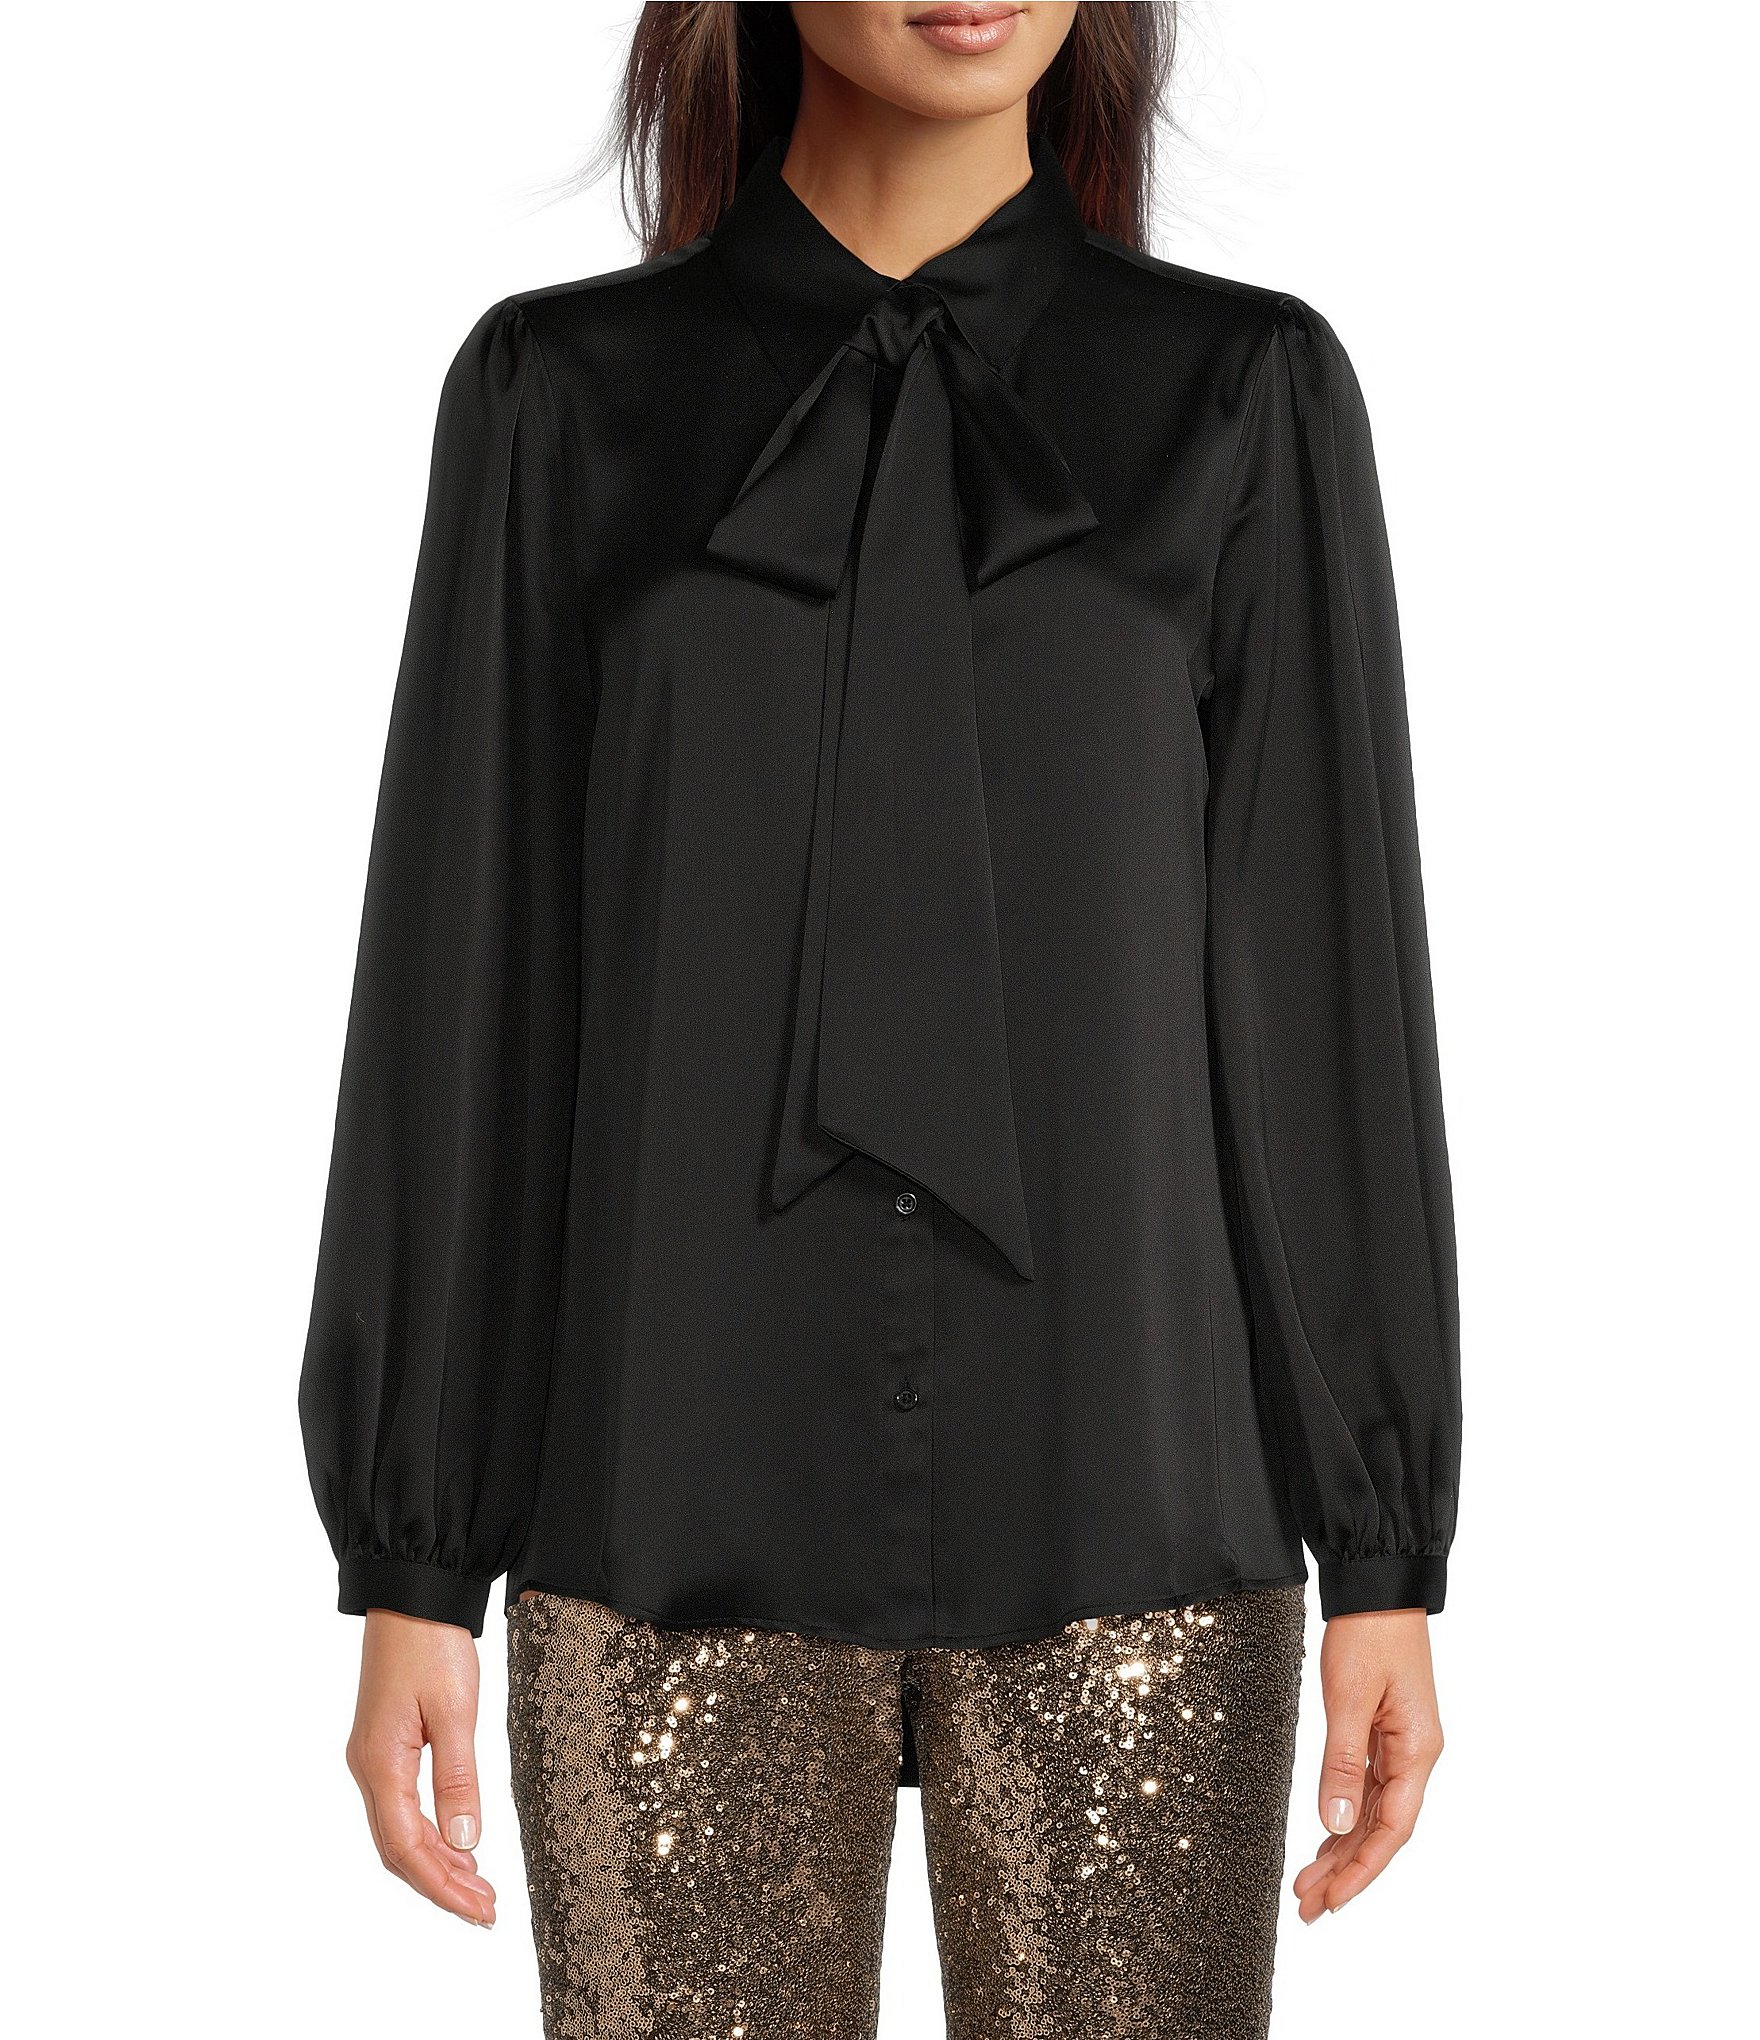 black bow on solid: Women's Blouses & Dressy Tops